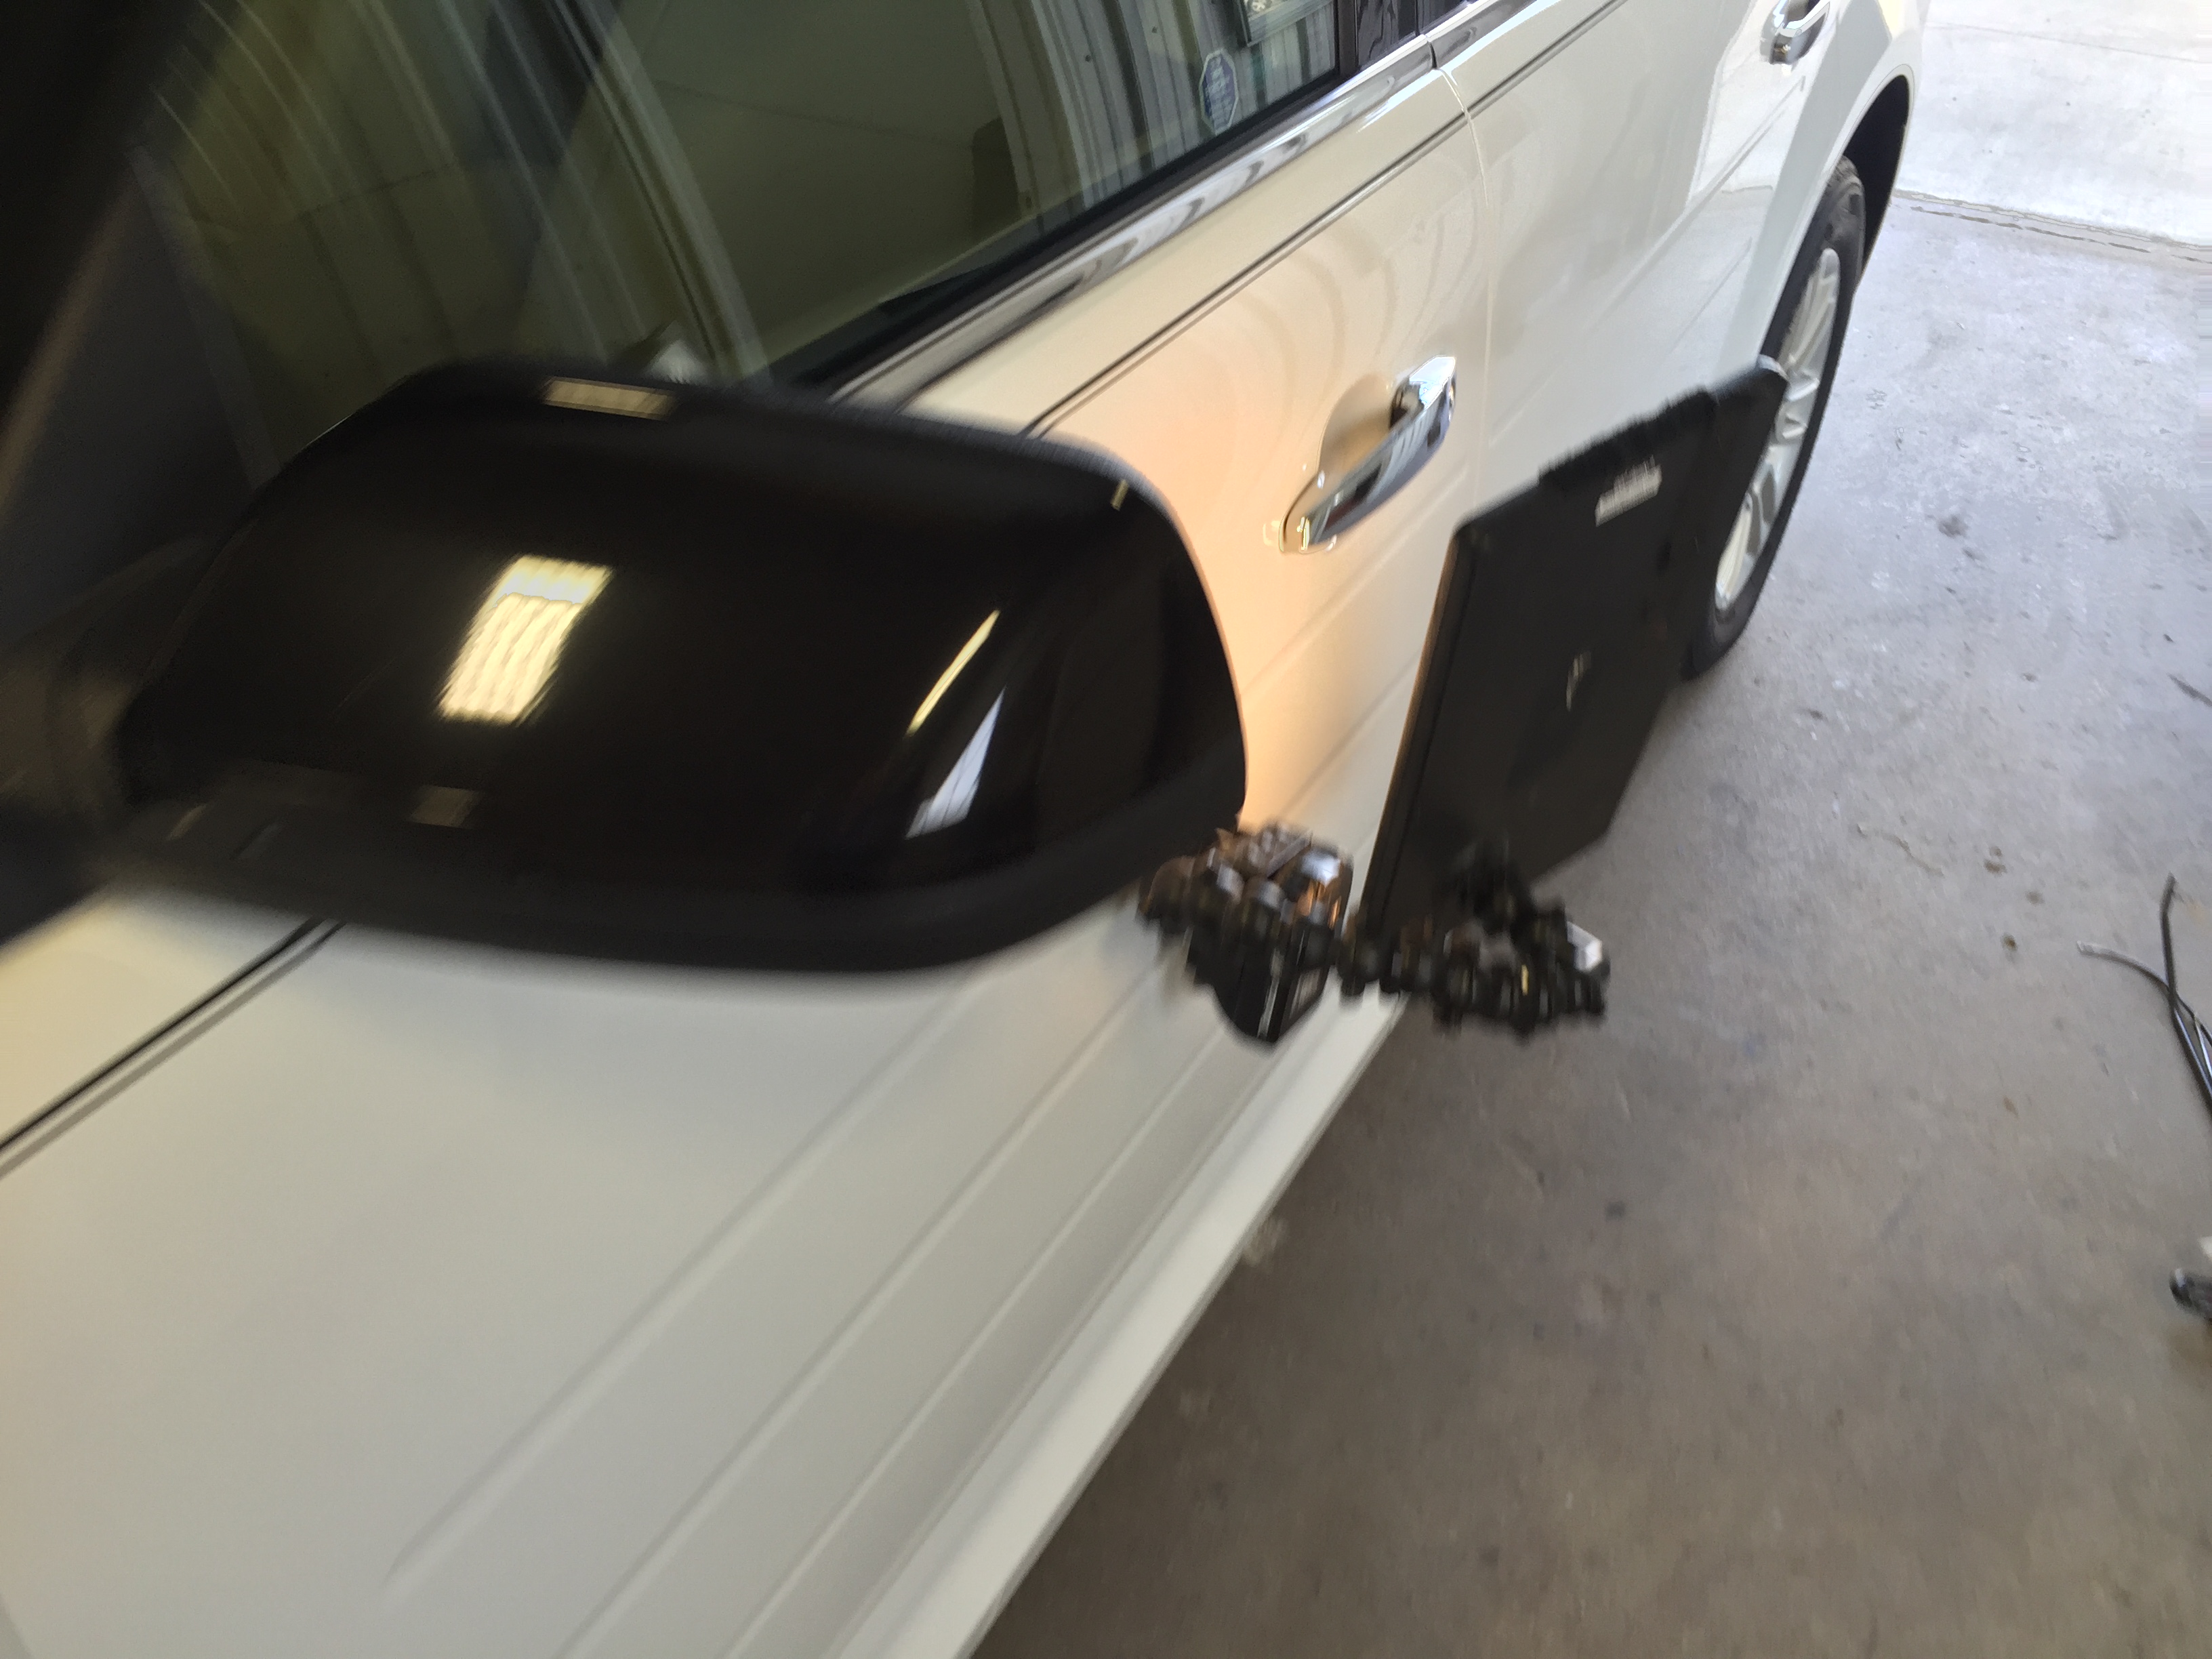 2015 Ford Flex, Dent Removal in the drivers door, Image's of before during and after this dent removal process. Paintless Dent Repair, Springfield, IL, http://217dent.com